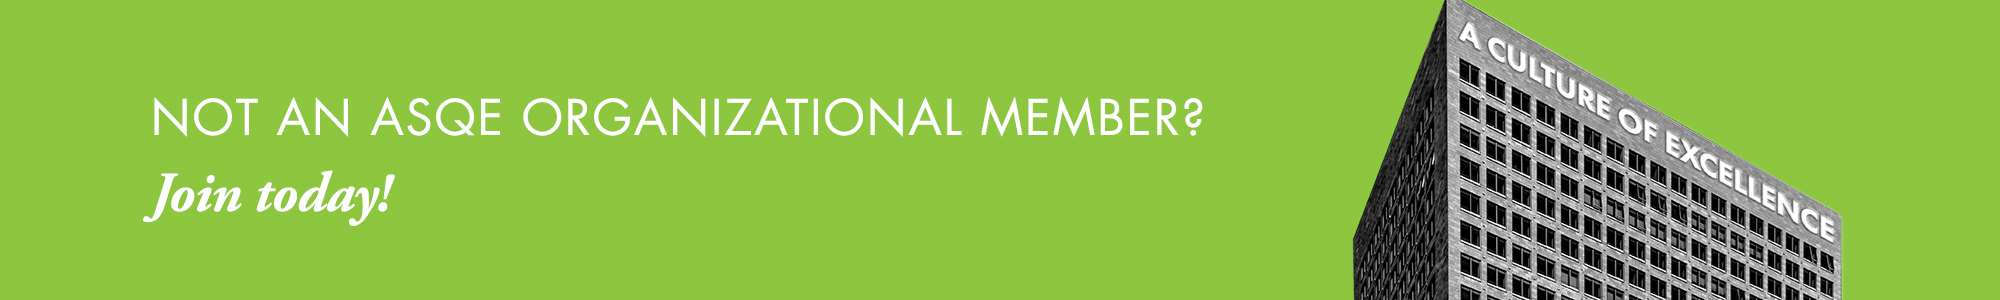 Green background with text "Not an ASQE Organizational Member? Join today!"